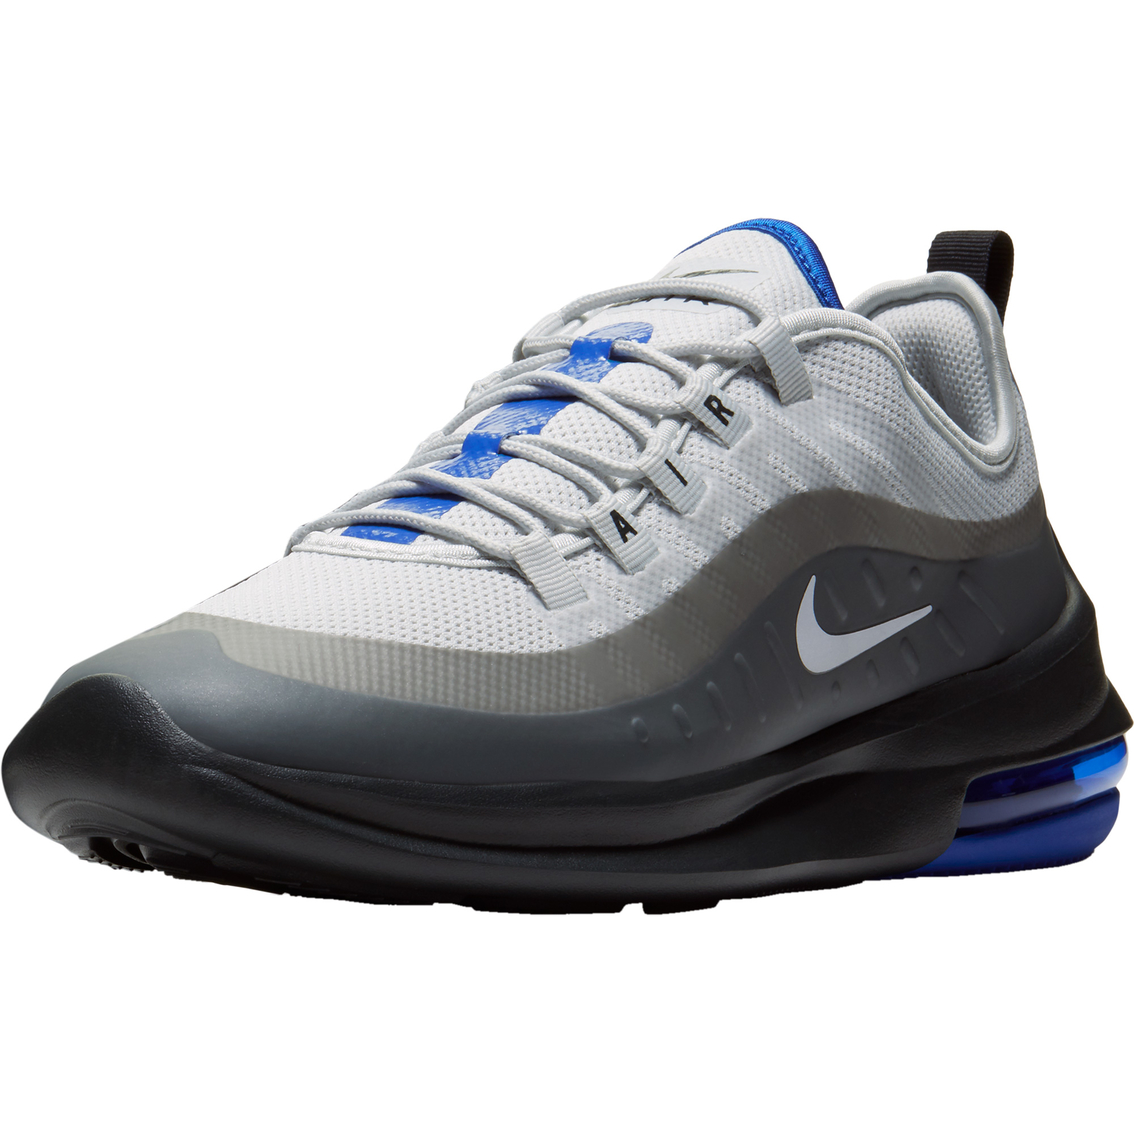 Nike Men's Air Max Axis Shoes | Sneakers | Shoes | Shop The Exchange عطور ميو ميو